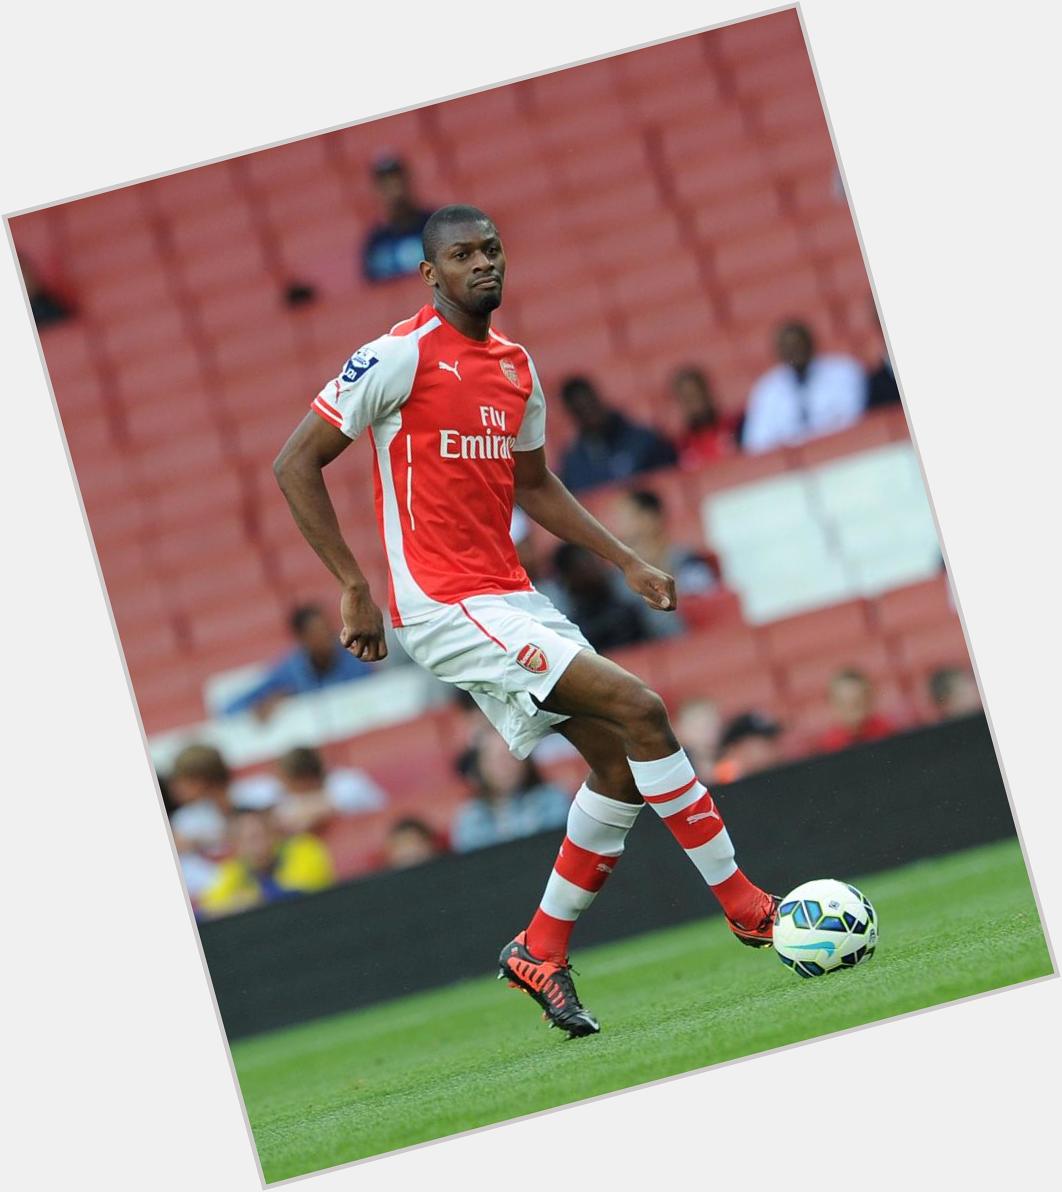 Happy birthday to one of the most injury
prone players the world has ever seen, Abou
Diaby. He turns 29 today.
